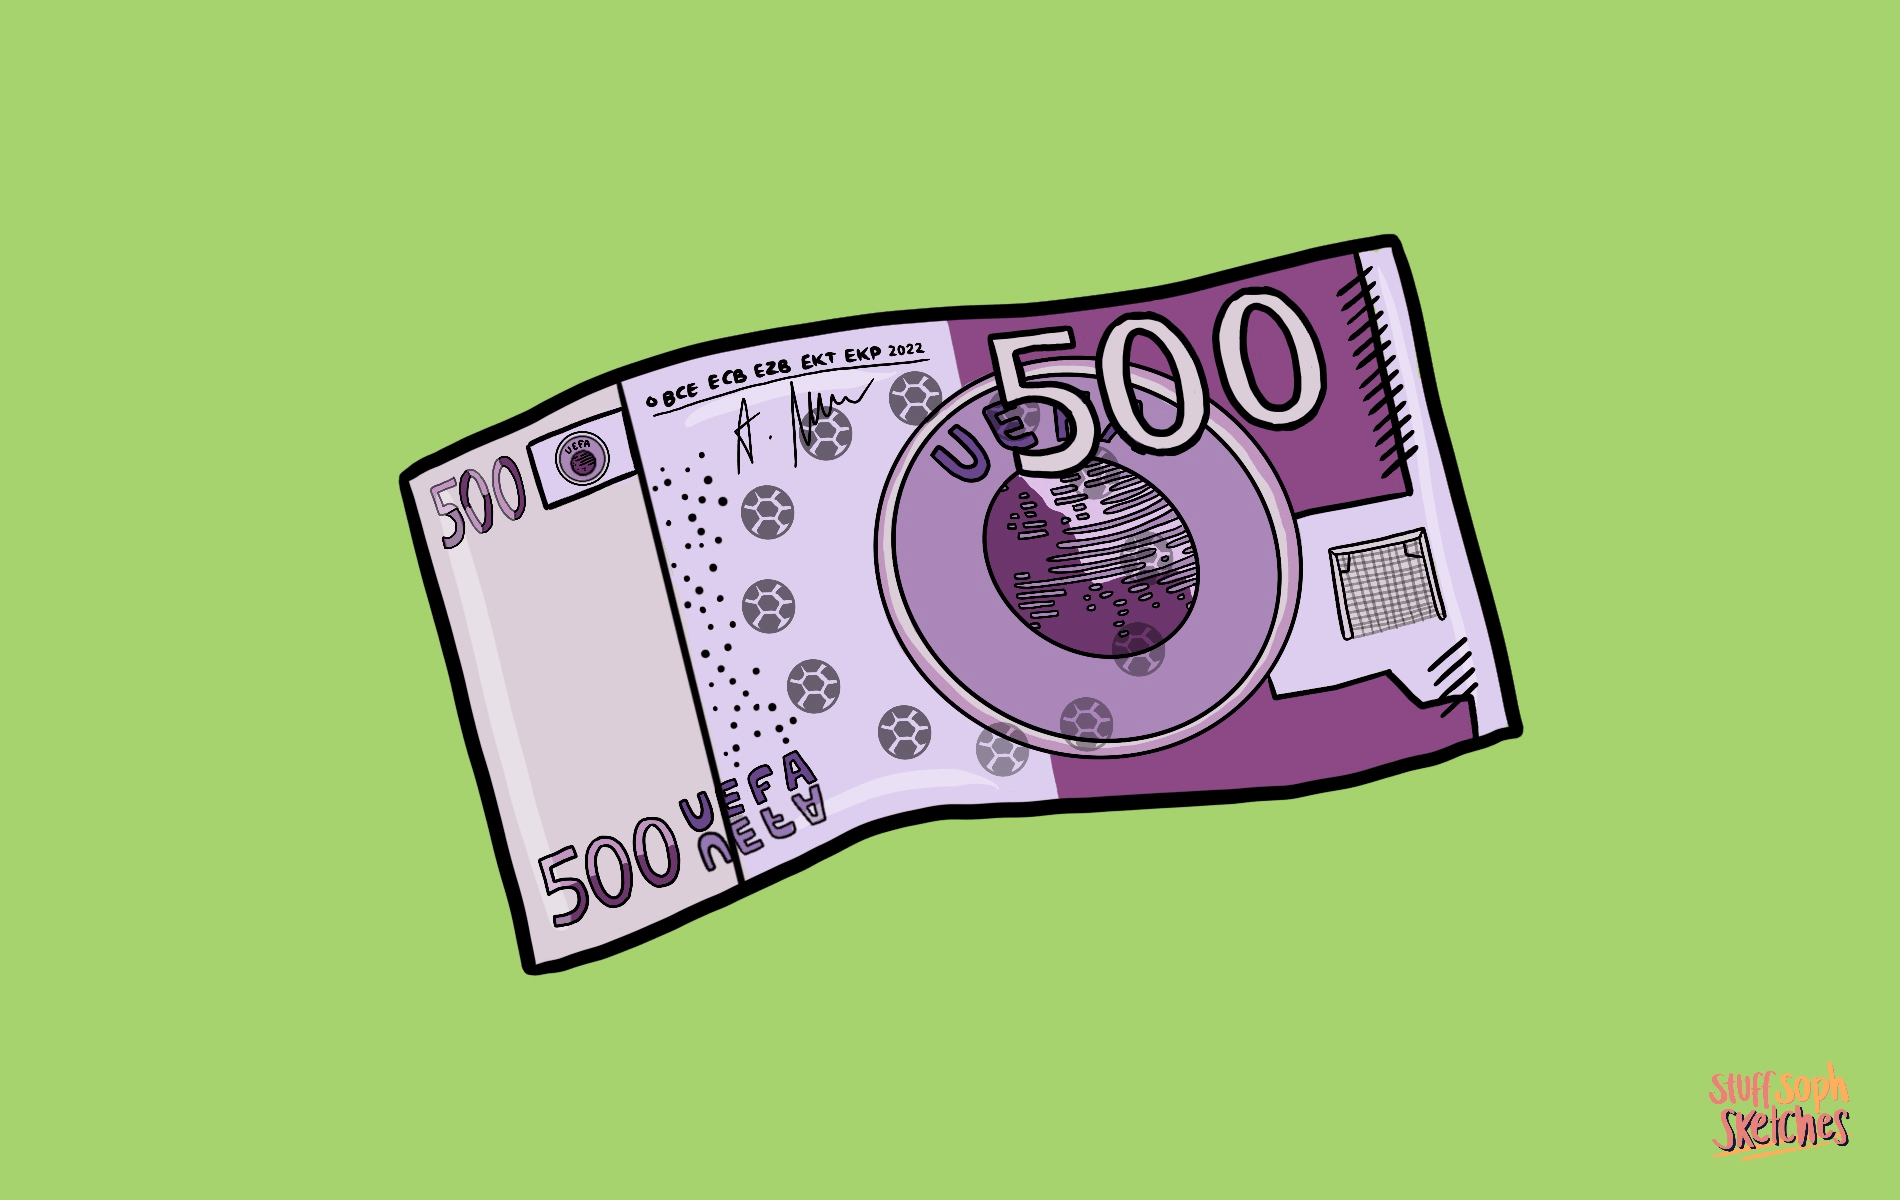 Uefa themed bank note of 500 denomination